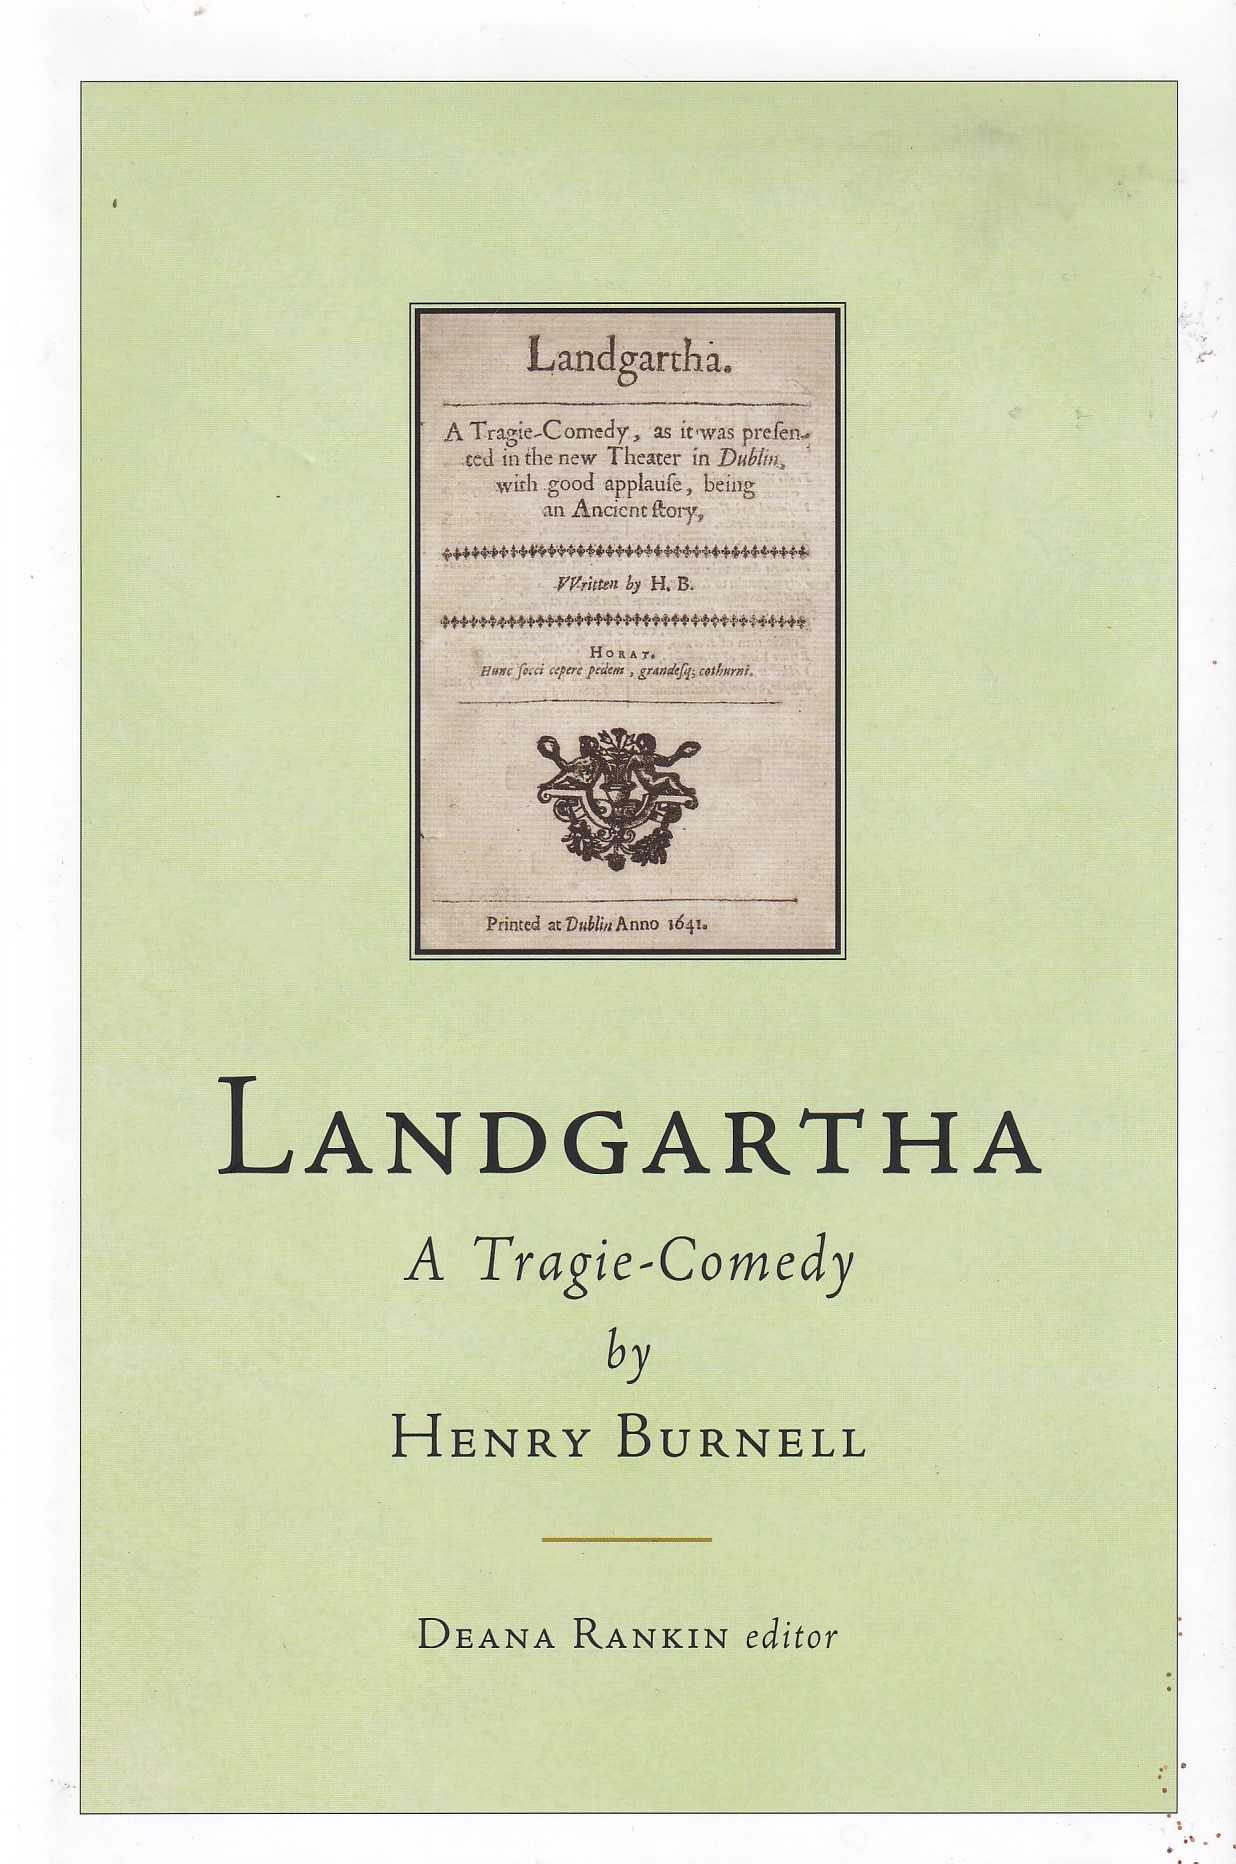 Landgartha: A Tragie-Comedy: By Henry Burnell (Literature of Early Modern Ireland) | Burnell, Henry | Charlie Byrne's